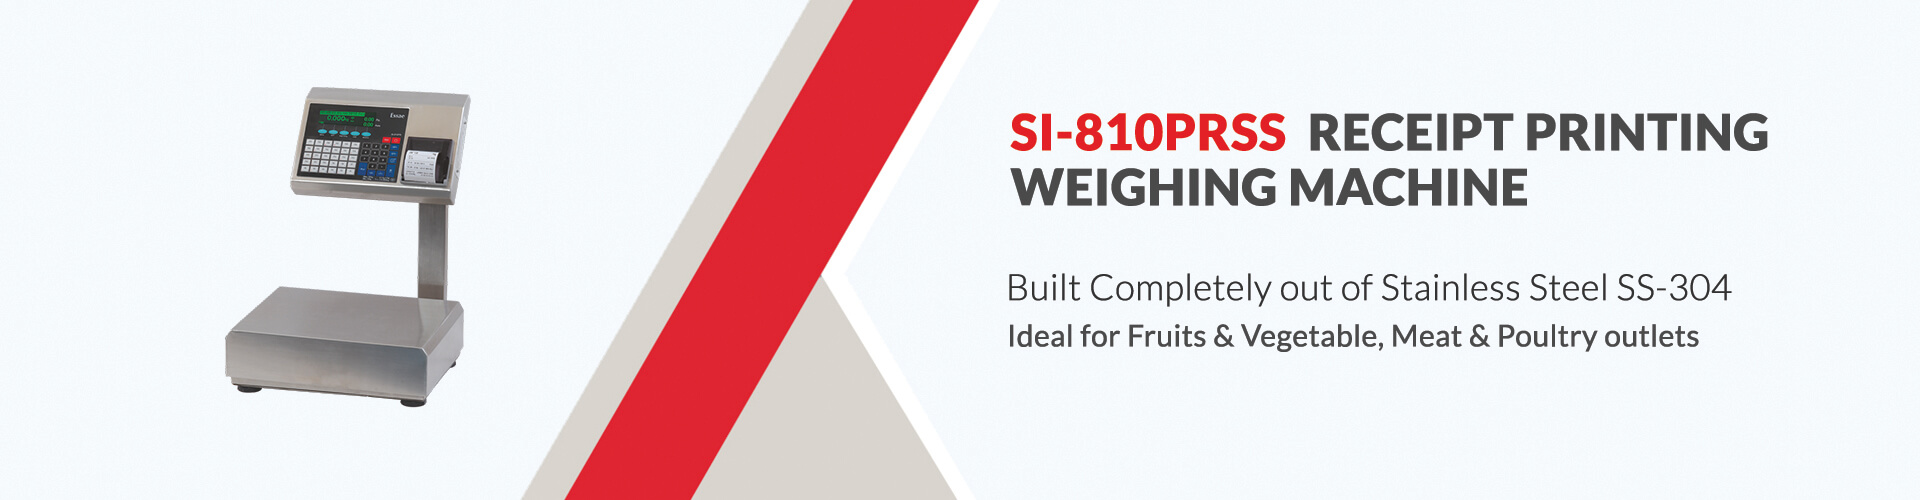 weighing scale banner